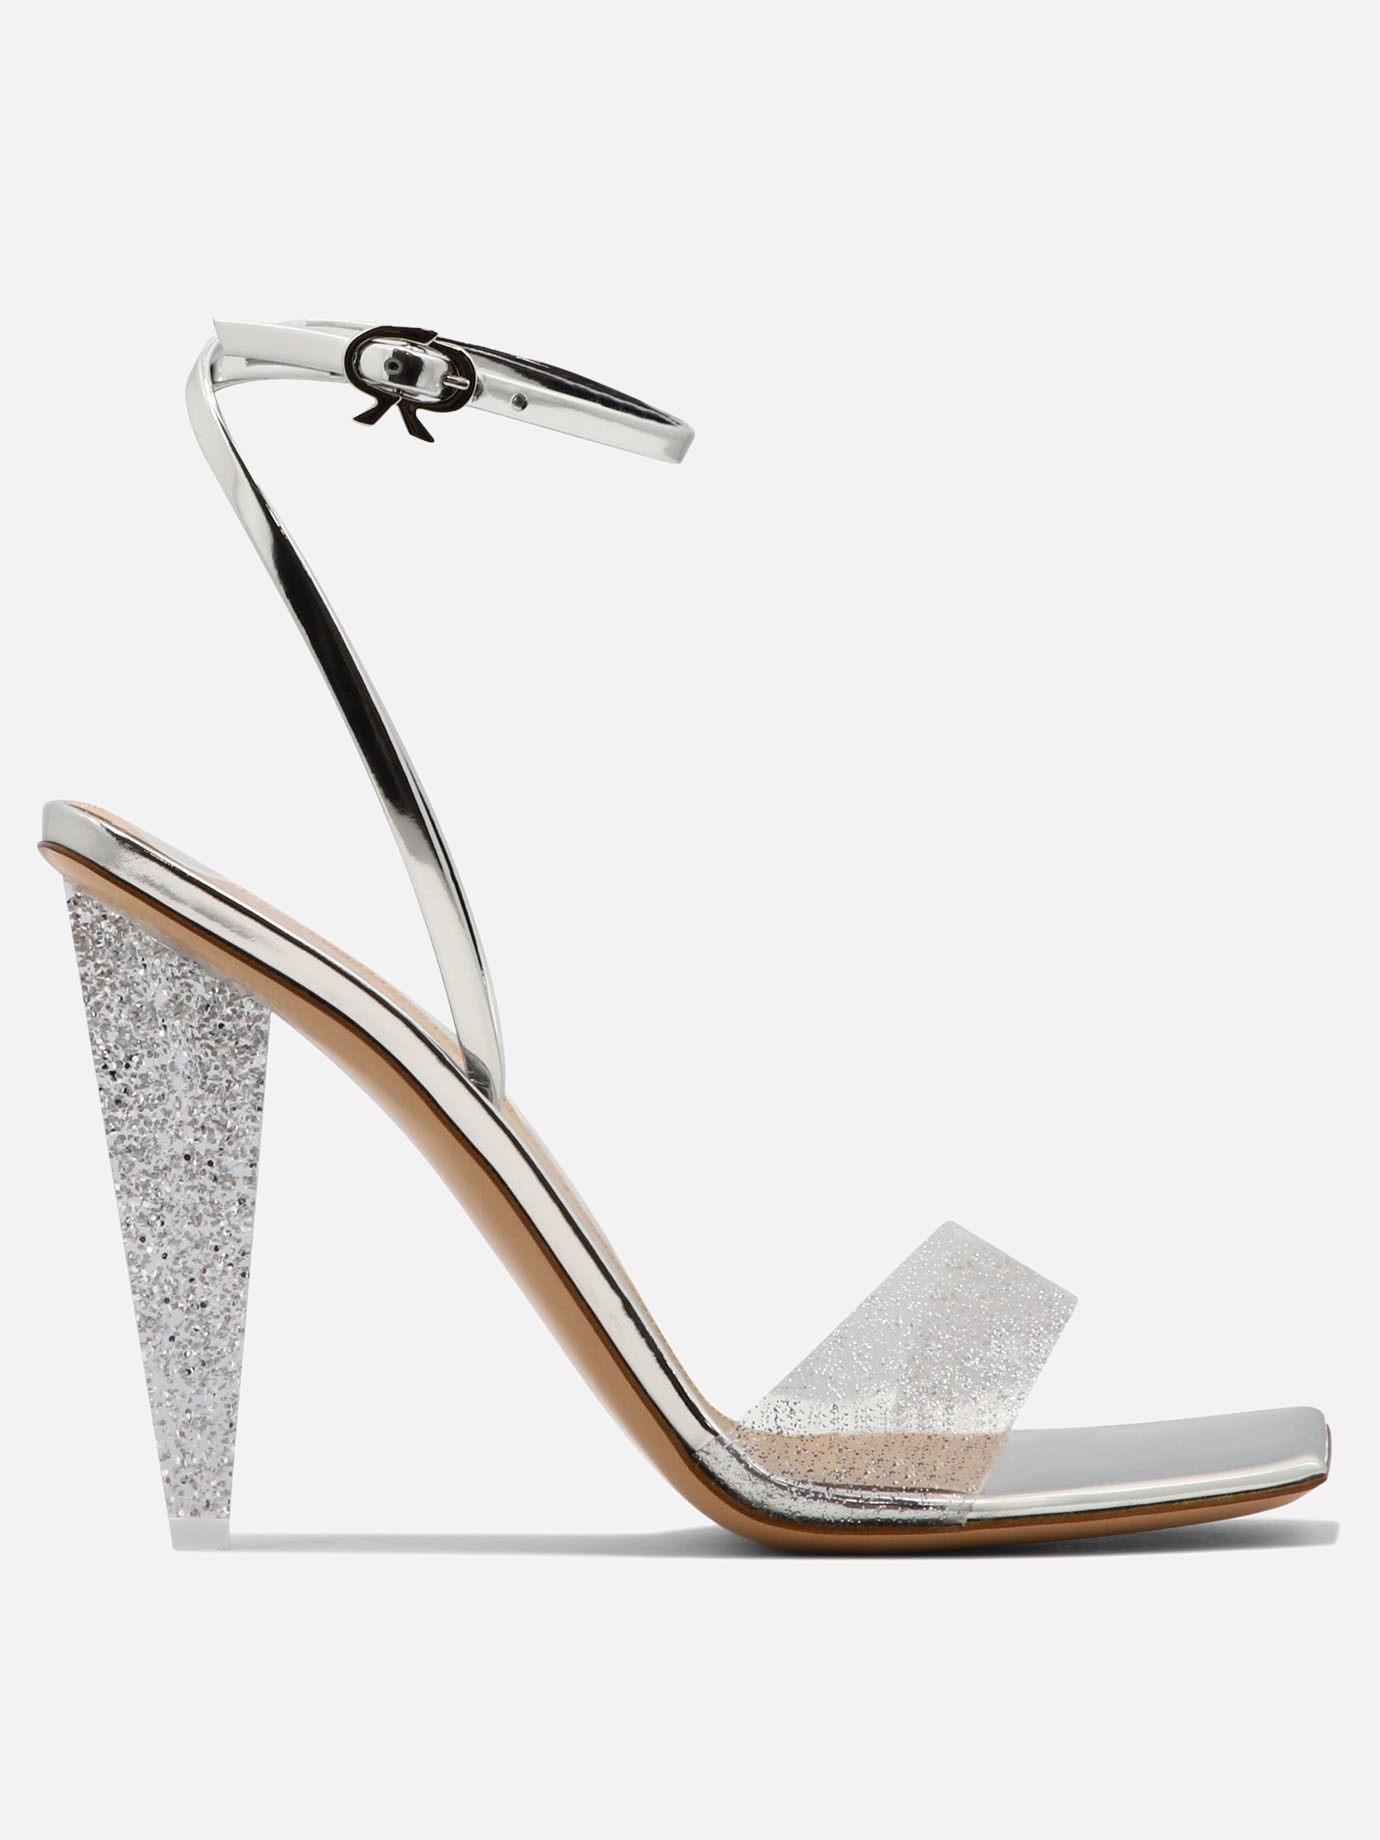  Odyssey  sandals by Gianvito Rossi